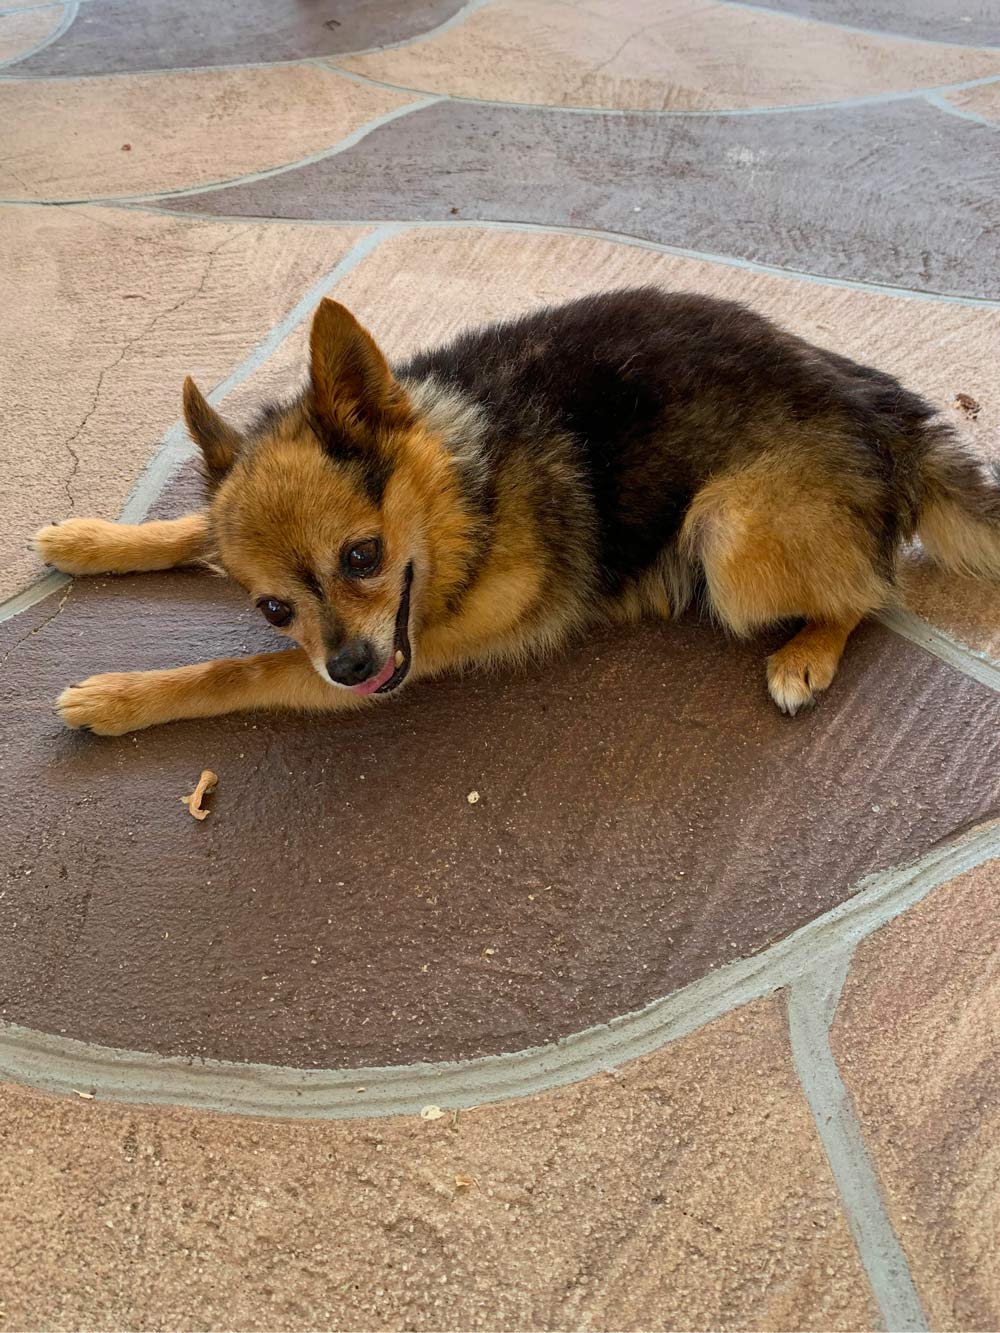 Patricia M. sent a picture of her sweet, smiling, seven-pound 13-year-old Chihuahua Oliver, lying on the patio.